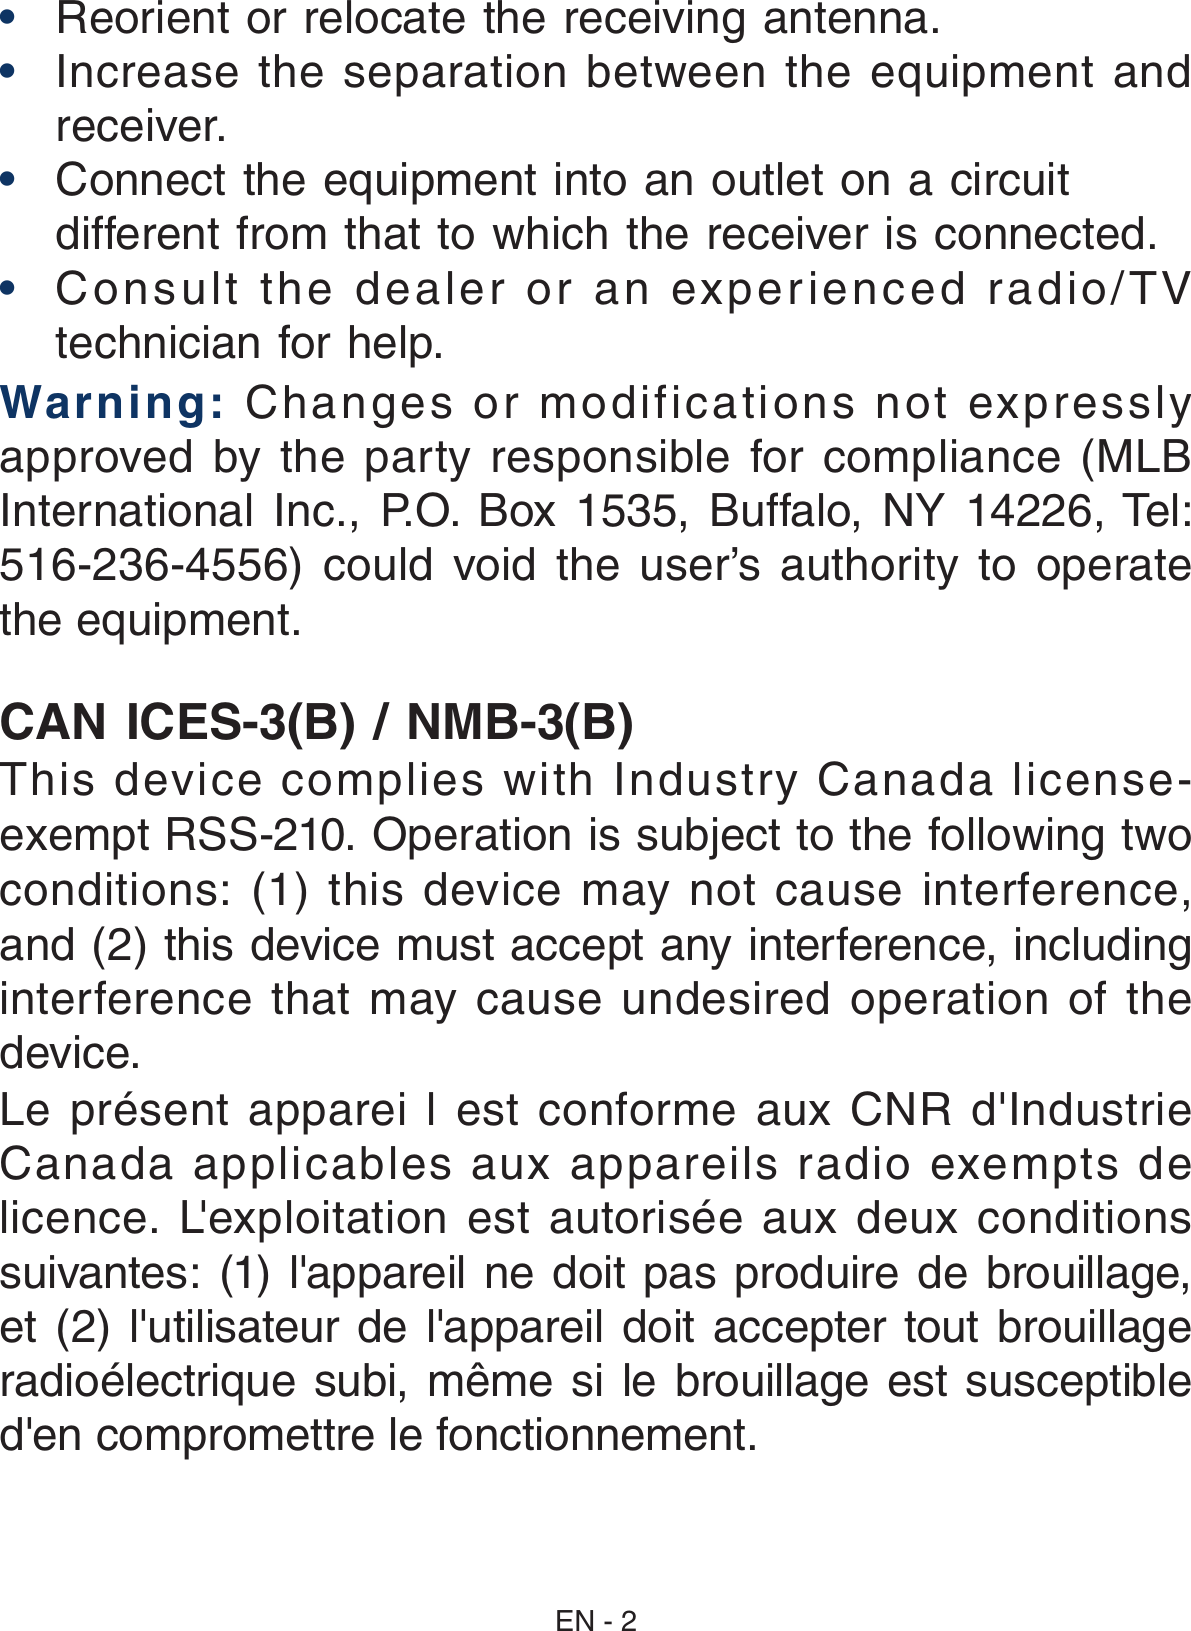 EN - 2CAN ICES-3(B) / NMB-3(B)This device complies with Industry Canada license-exempt RSS-210. Operation is subject to the following two conditions: (1) this device may not cause  interference, and (2) this device must accept any interference, including interference  that  may  cause  undesired  operation  of  the device.Le  présent  apparei  l  est  conforme  aux  CNR  d&apos;Industrie Canada  applicables  aux  appareils  radio  exempts  de licence.  L&apos;exploitation  est  autorisée  aux  deux  conditions suivantes: (1) l&apos;appareil ne doit pas produire de brouillage, et (2) l&apos;utilisateur de l&apos;appareil doit accepter tout brouillage radioélectrique subi, même si le brouillage est susceptible d&apos;en compromettre le fonctionnement.•  Reorient or relocate the receiving antenna.•  Increase the separation between the  equipment  and receiver.•  Connect the equipment into an outlet on a circuit different from that to which the receiver is connected.•  Consult the dealer or an experienced radio/TV technician for help.Warning: Changes or modifications not expressly approved by the  party responsible for compliance  (MLB International  Inc.,  P.O.  Box  1535,  Buffalo,  NY  14226, Tel: 516-236-4556)  could  void  the  user’s  authority  to  operate the equipment.